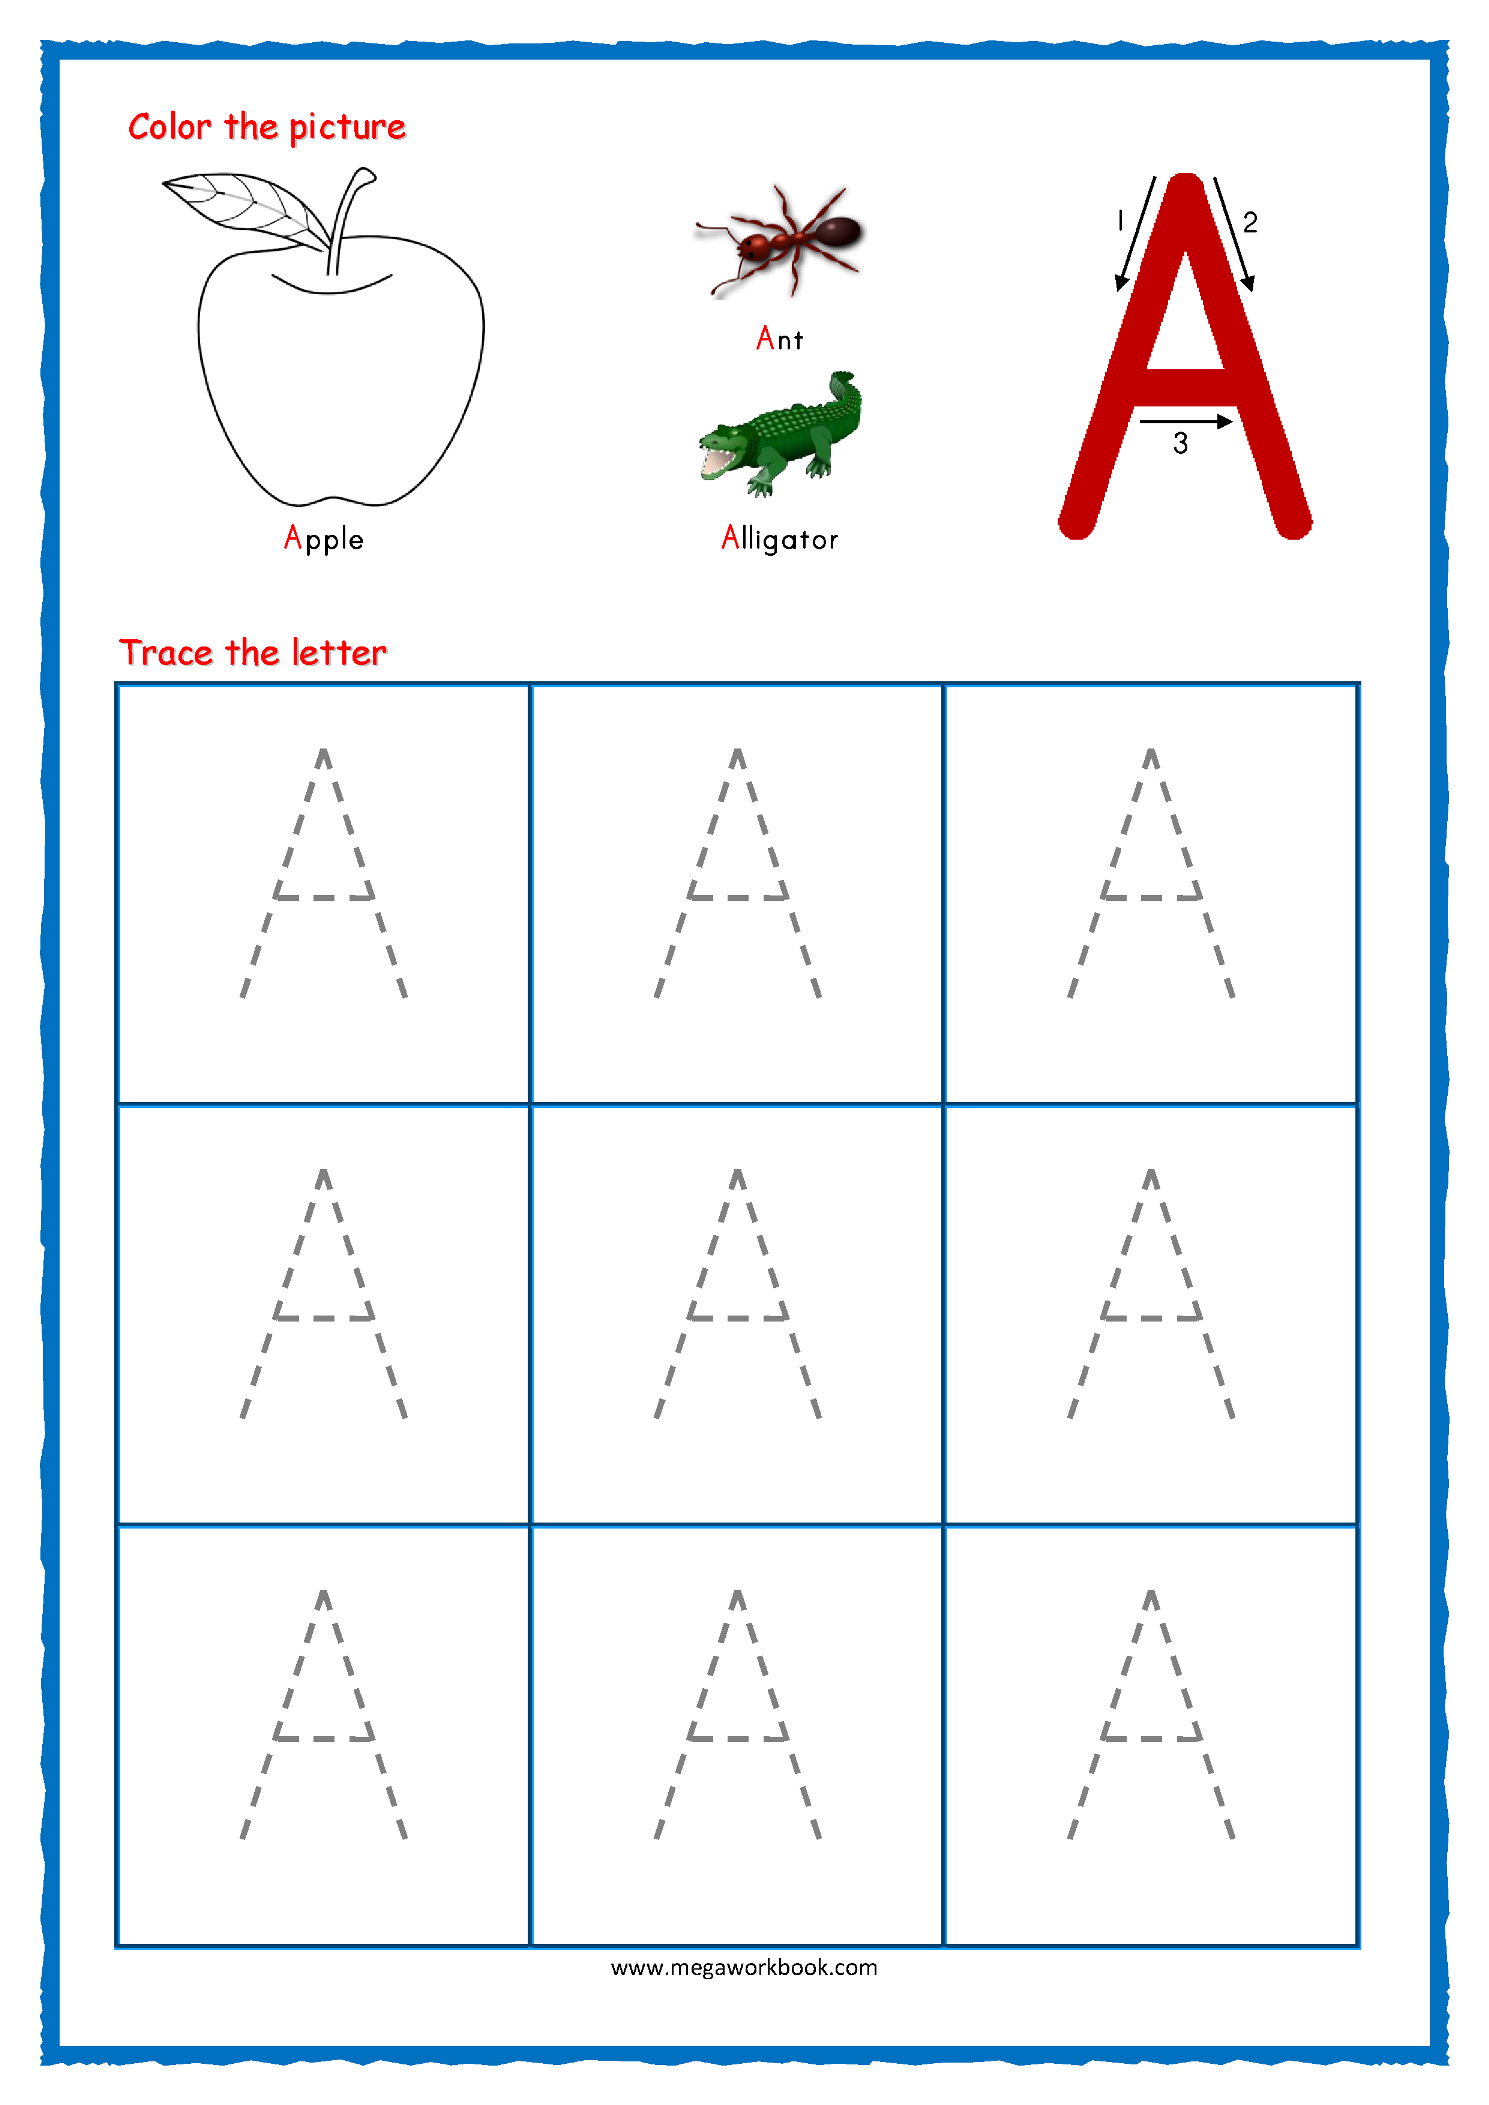 Coloring Book : Coloring Book Alphabet Tracing Worksheets regarding Alphabet Tracing Worksheets Capital Letters